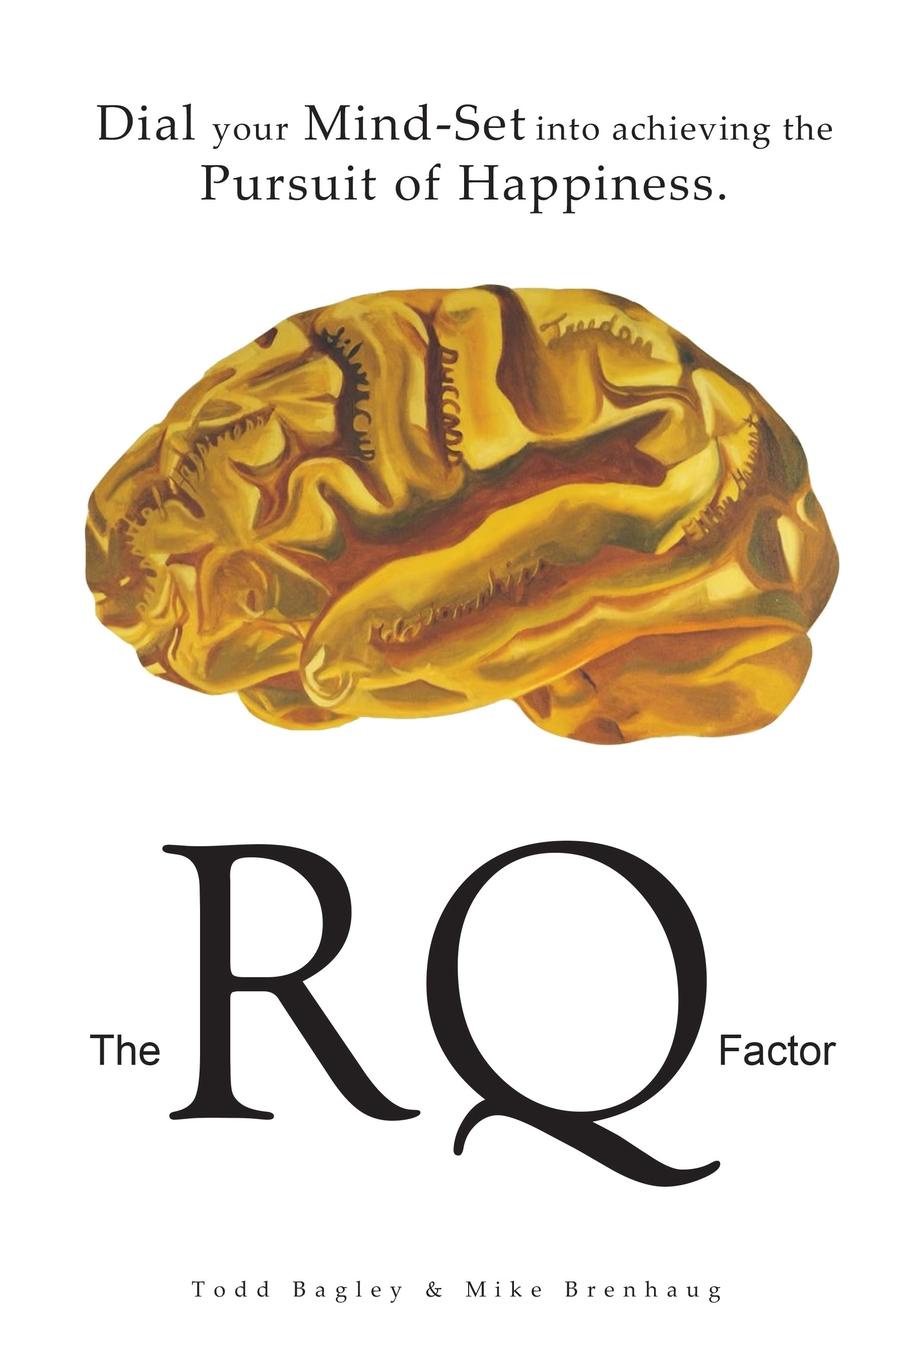 The RQ Factor. Dial your Mind-Set into achieving the Pursuit of Happiness